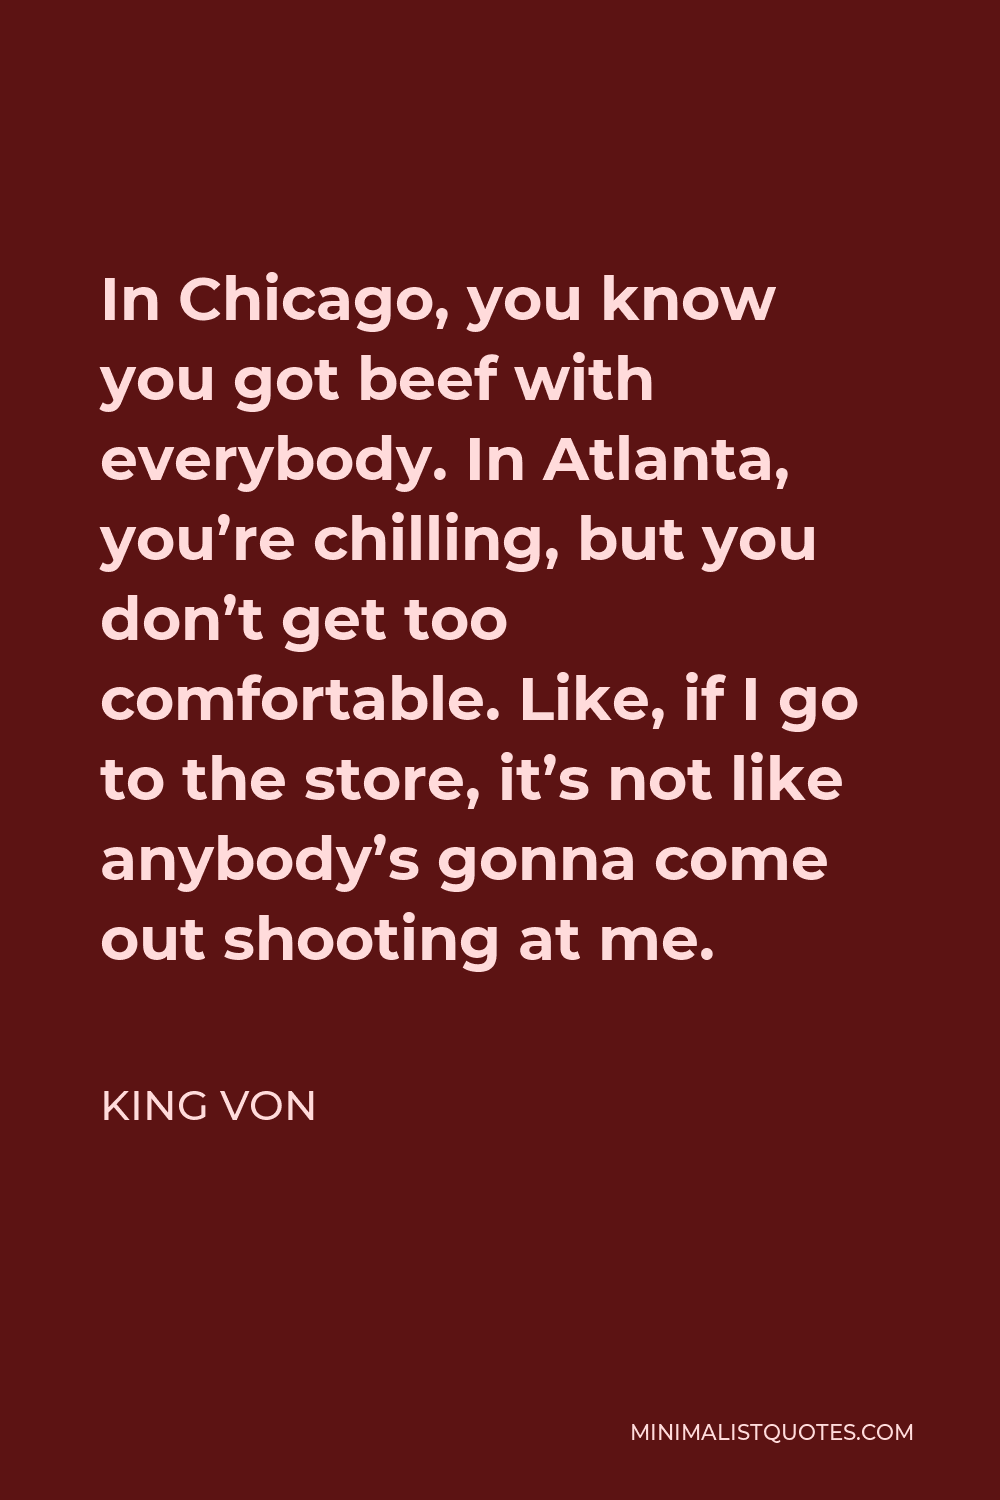 King Von Quote - In Chicago, you know you got beef with everybody. In Atlanta, you’re chilling, but you don’t get too comfortable. Like, if I go to the store, it’s not like anybody’s gonna come out shooting at me.